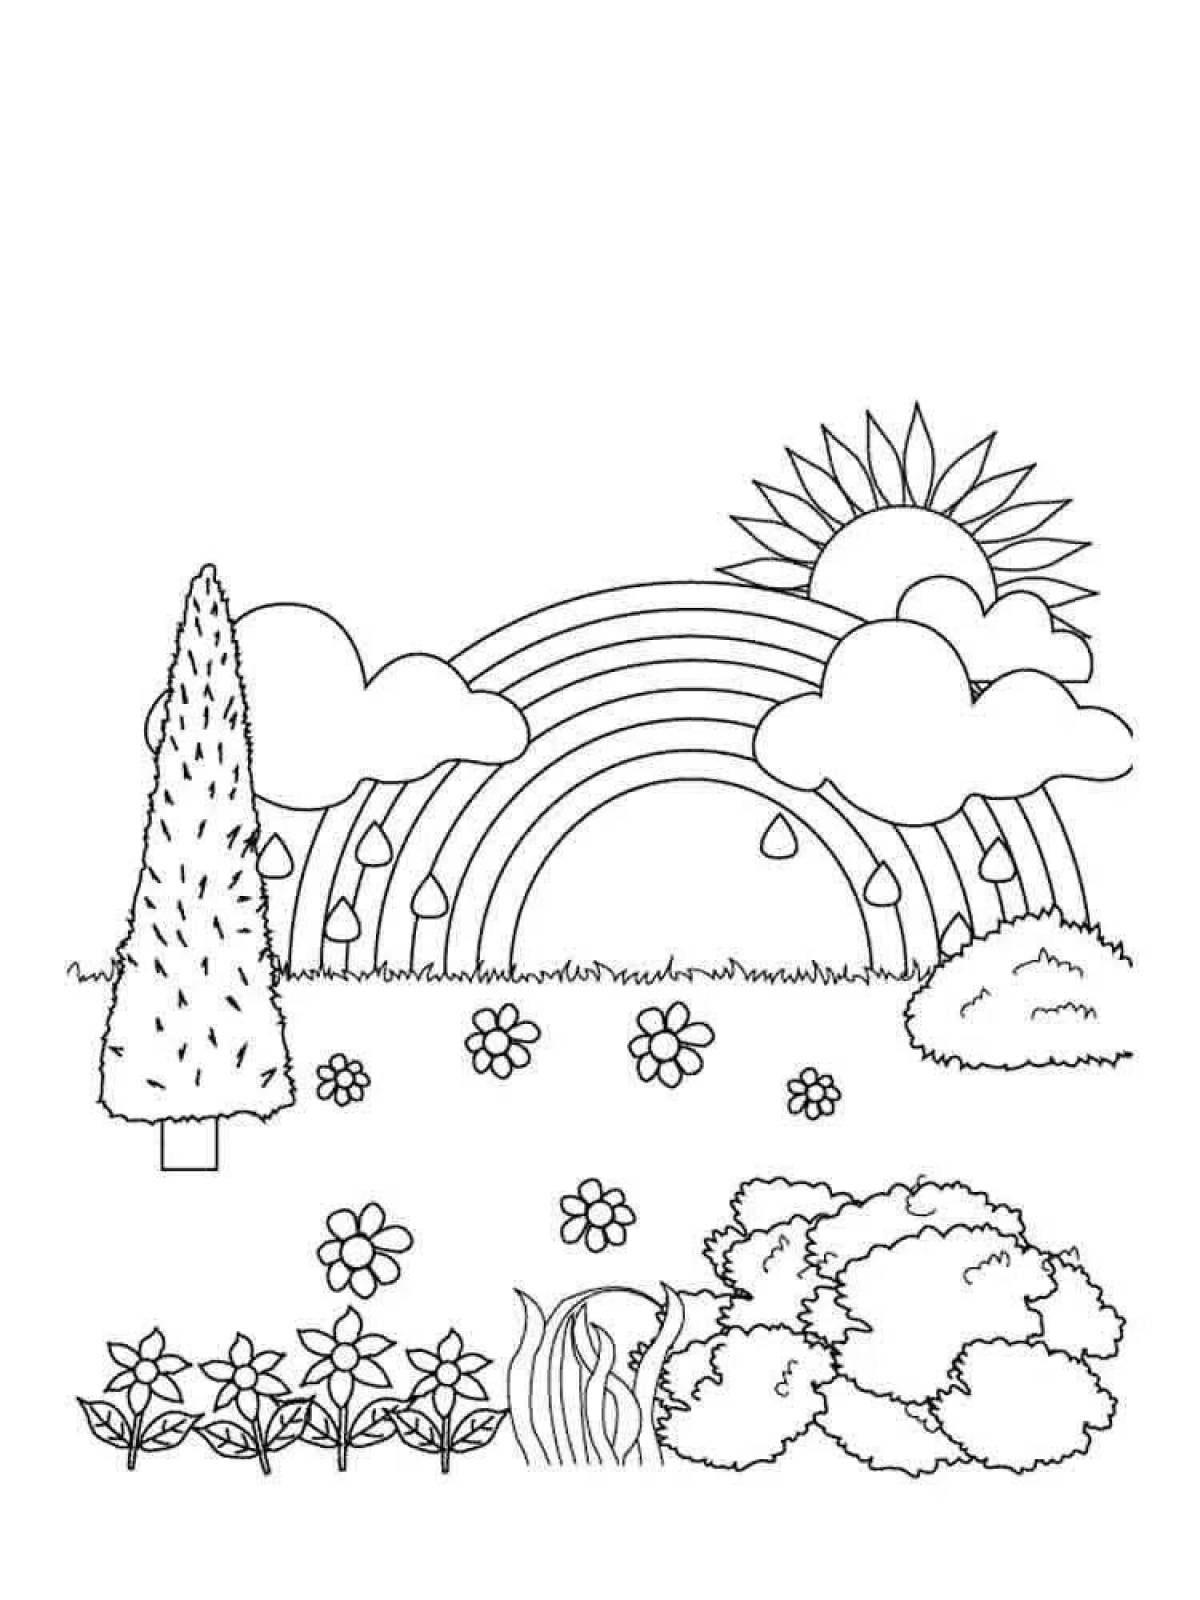 Joyful coloring of nature for children 6-7 years old